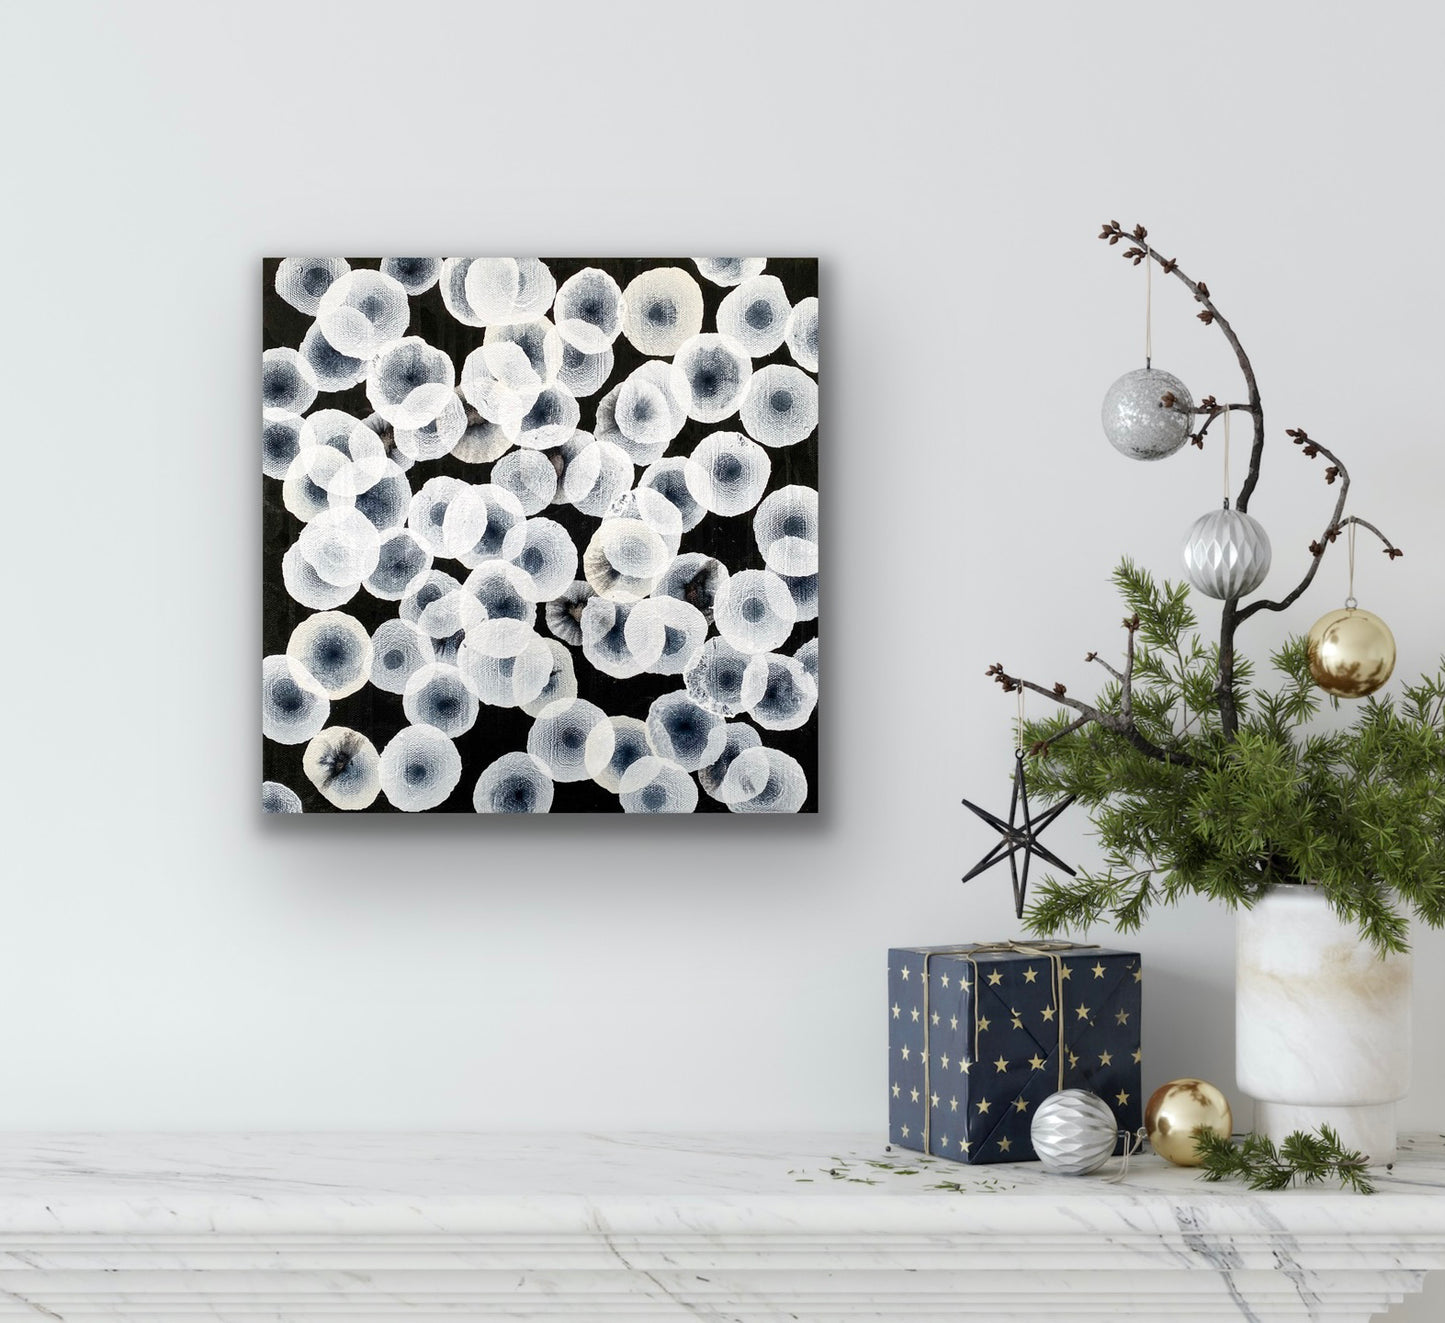 Orbicular Bloom XVI - Abstract Monochrome Painting